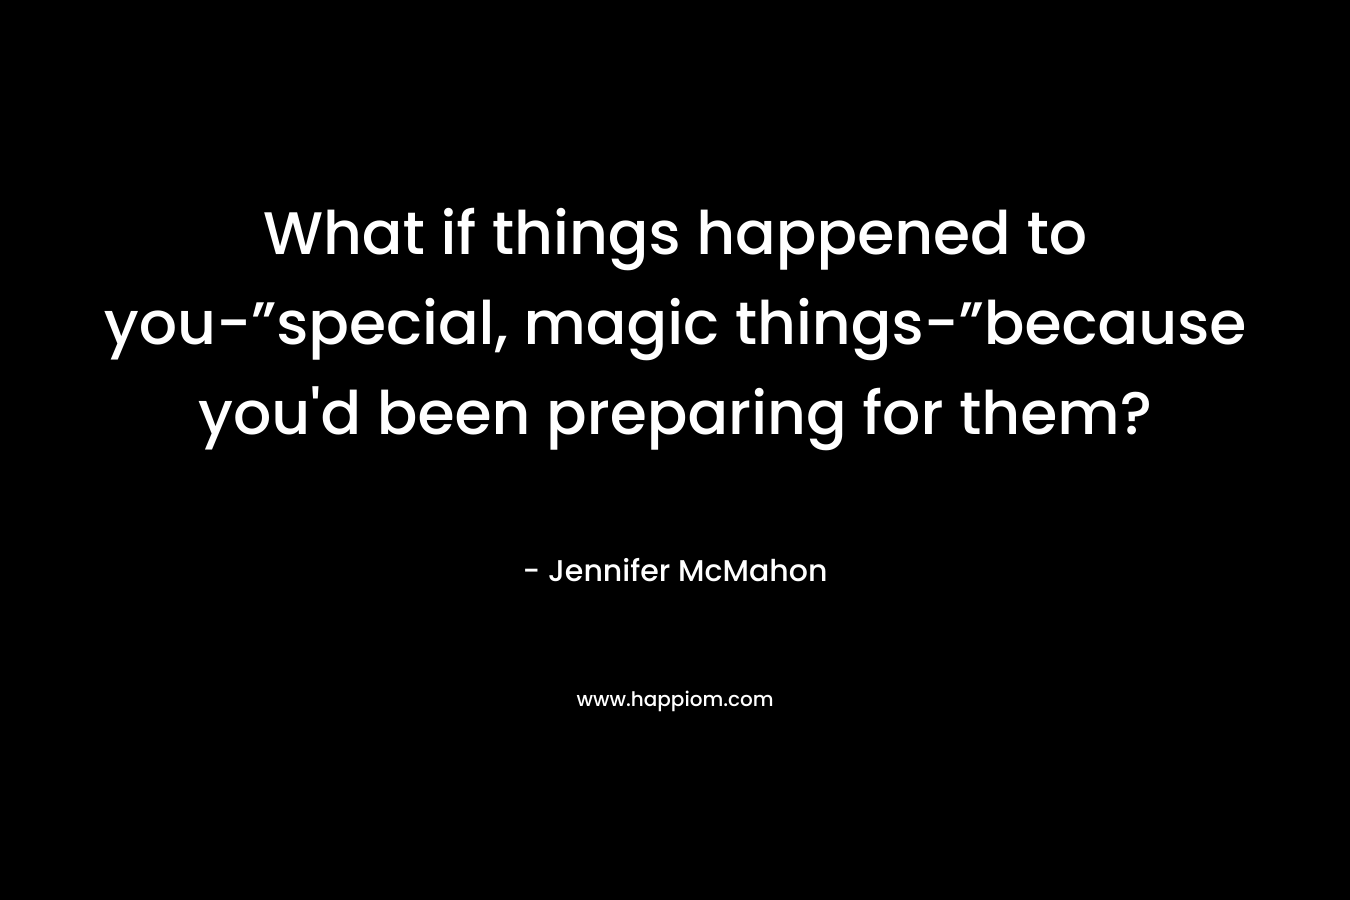 What if things happened to you-”special, magic things-”because you’d been preparing for them? – Jennifer McMahon